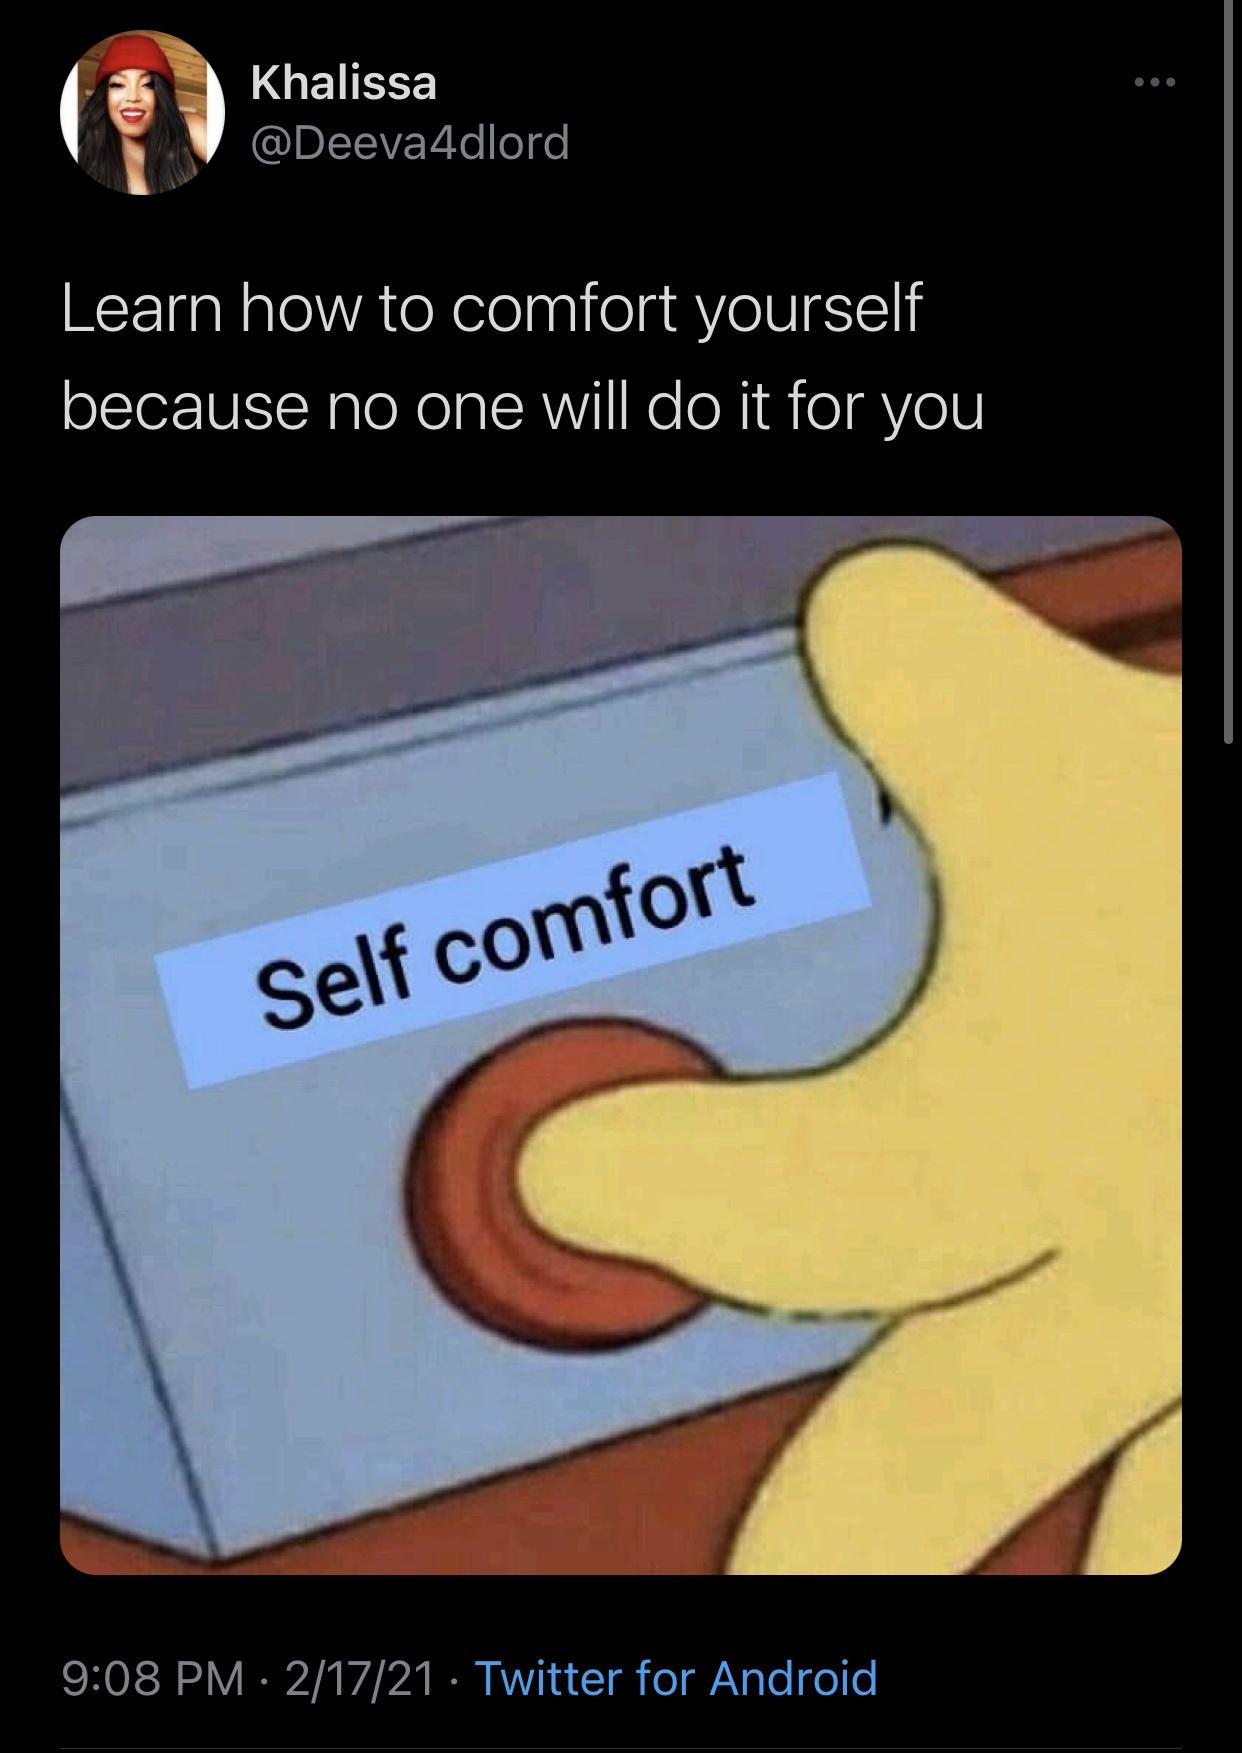 spongebob meme faces - Khalissa Learn how to comfort yourself because no one will do it for you Self comfort 21721 Twitter for Android